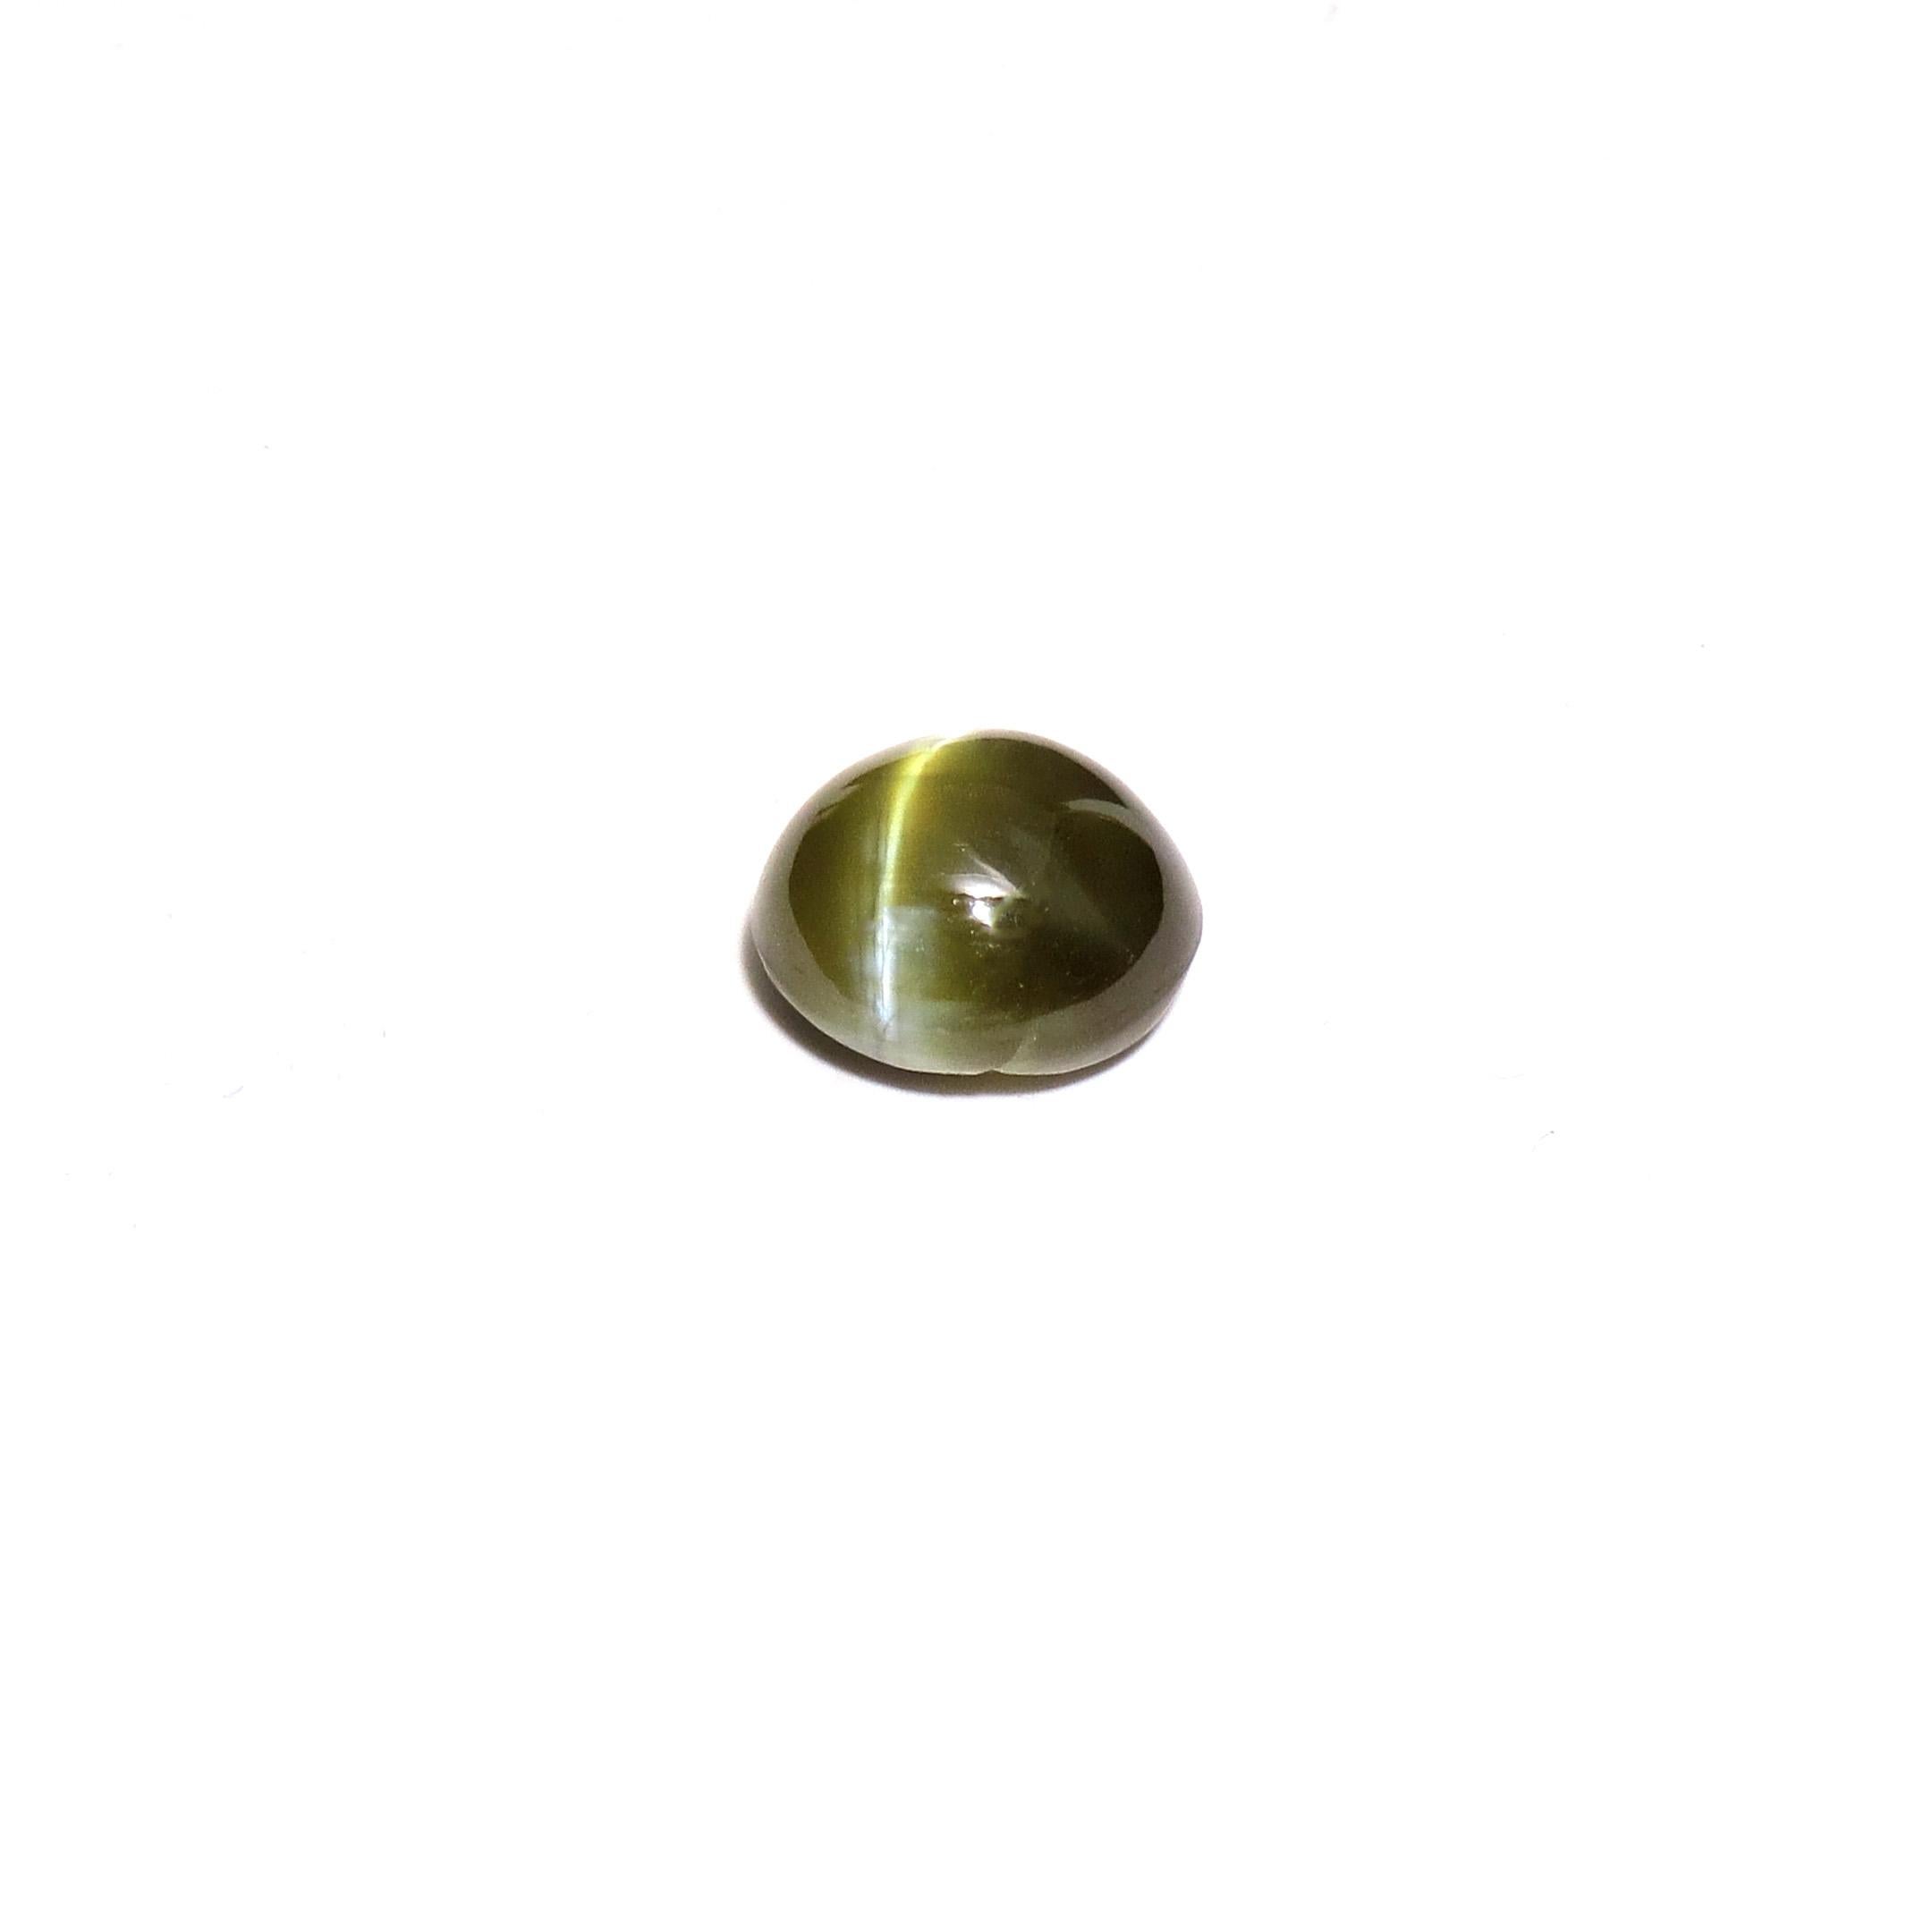 25.04ct GIA certified Chrysoberyl Cat's Eye. Well polished, with a strong eye. It's no common for a Chrysoberyl to form over 15.00 carats, making this a unique gemstone perfect for a ring or pendant. 

1 oval cats eye Chrysoberyl cats eyes approx.